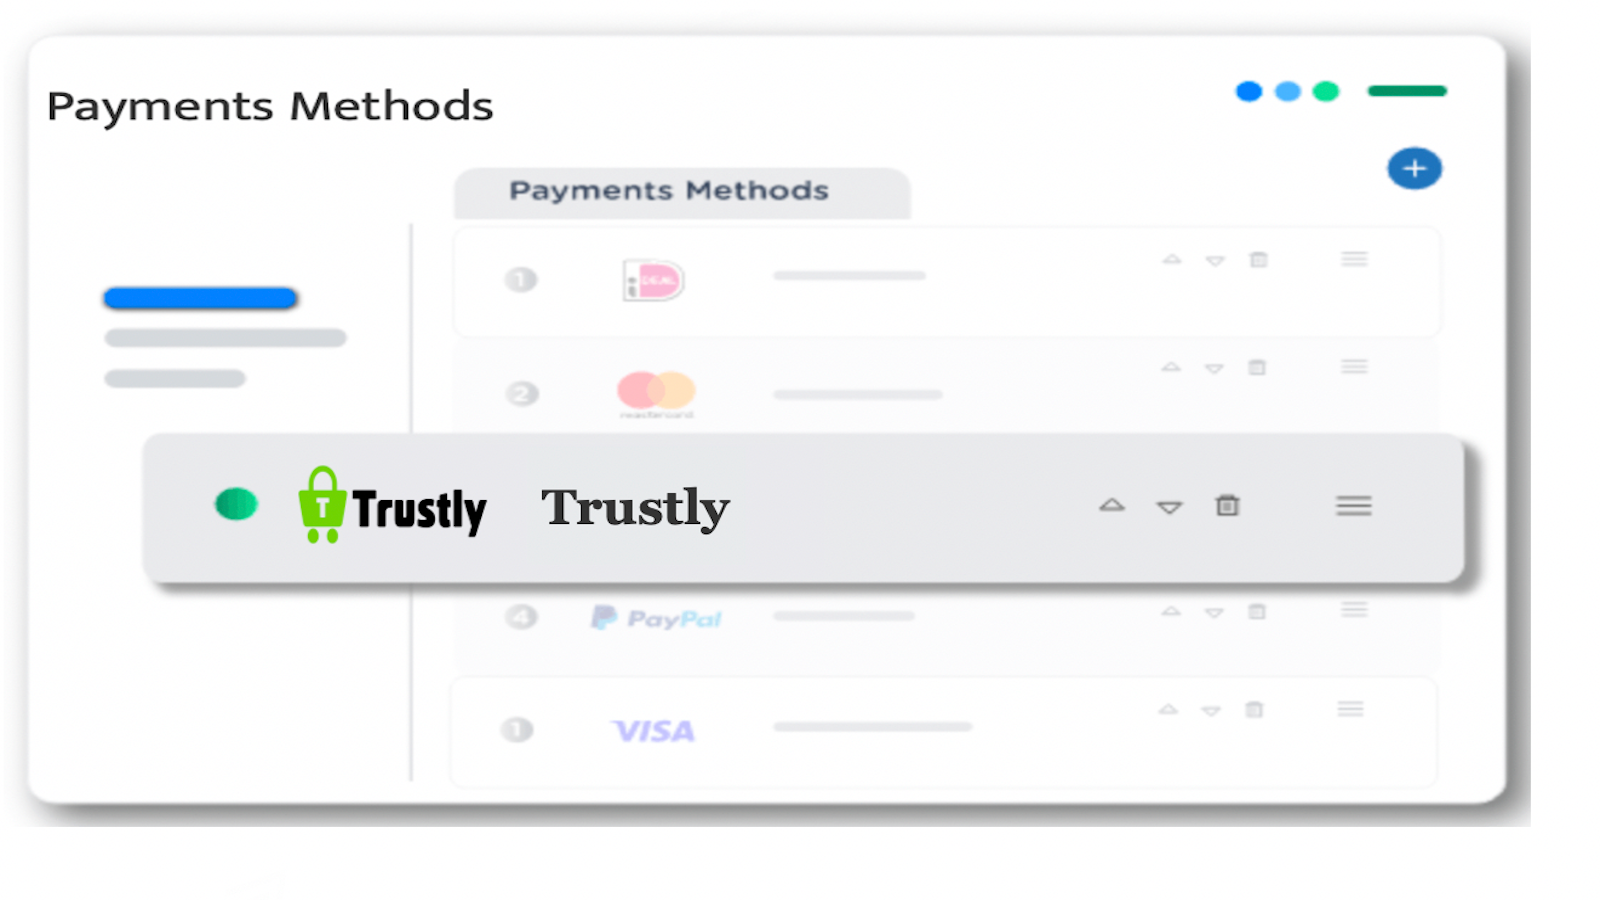 Using Trustly as payment method